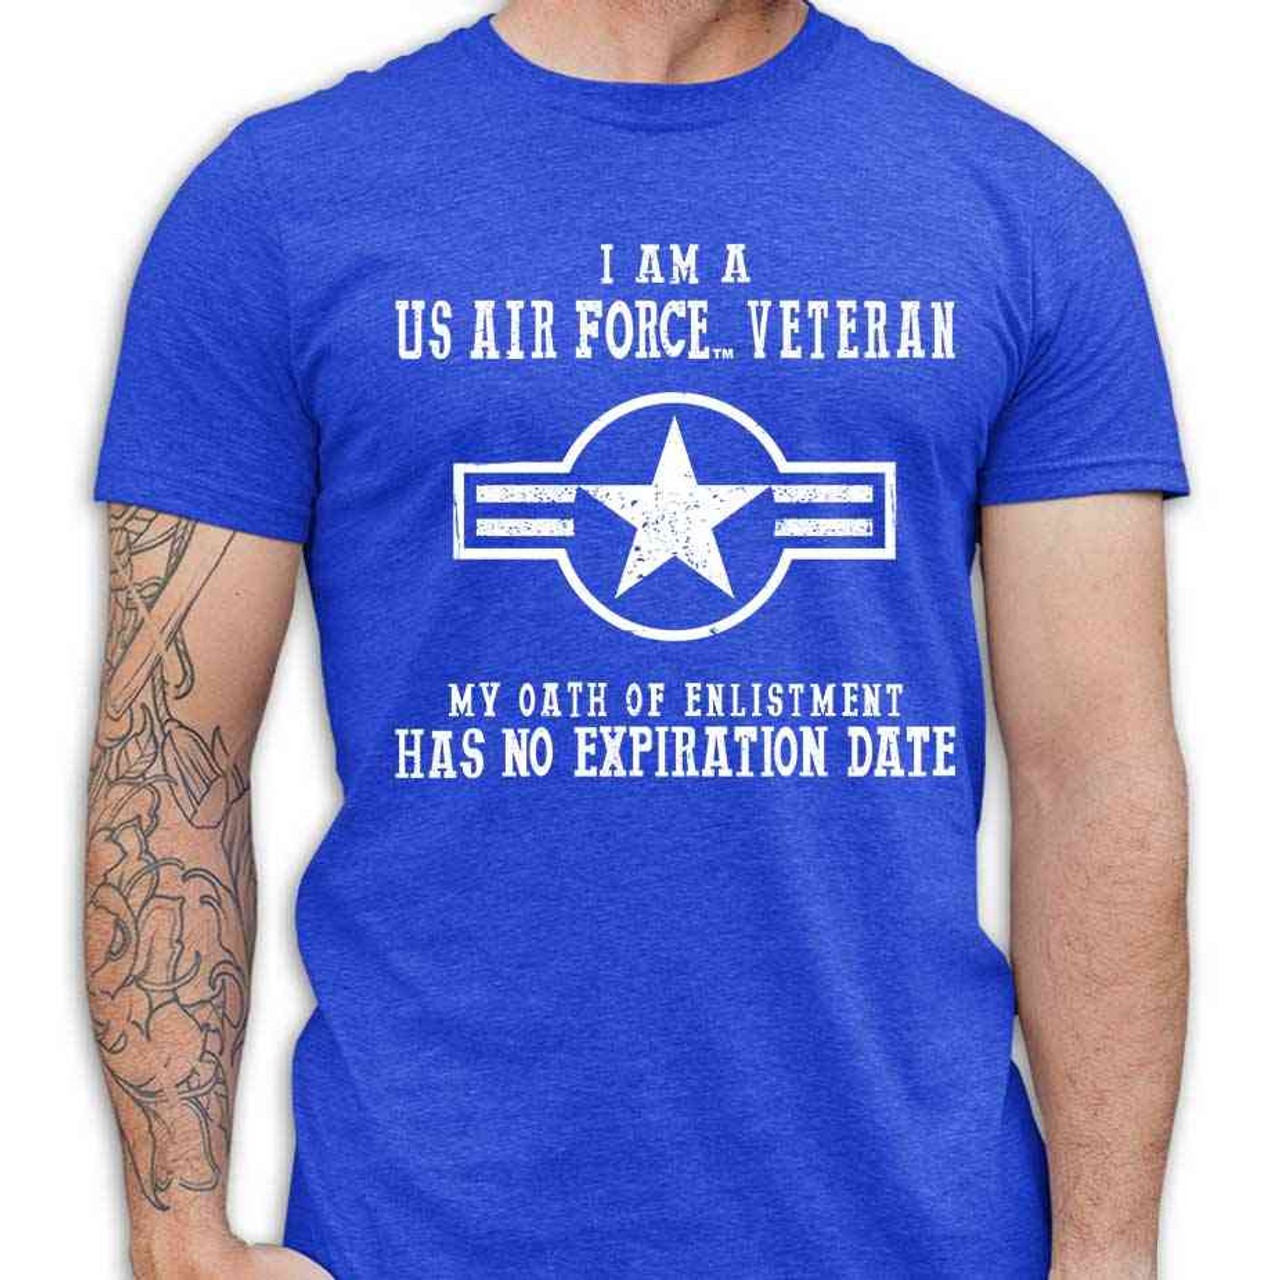 Air Force Veteran T-Shirt with Oath Of Enlistment Text and USAF Roundel